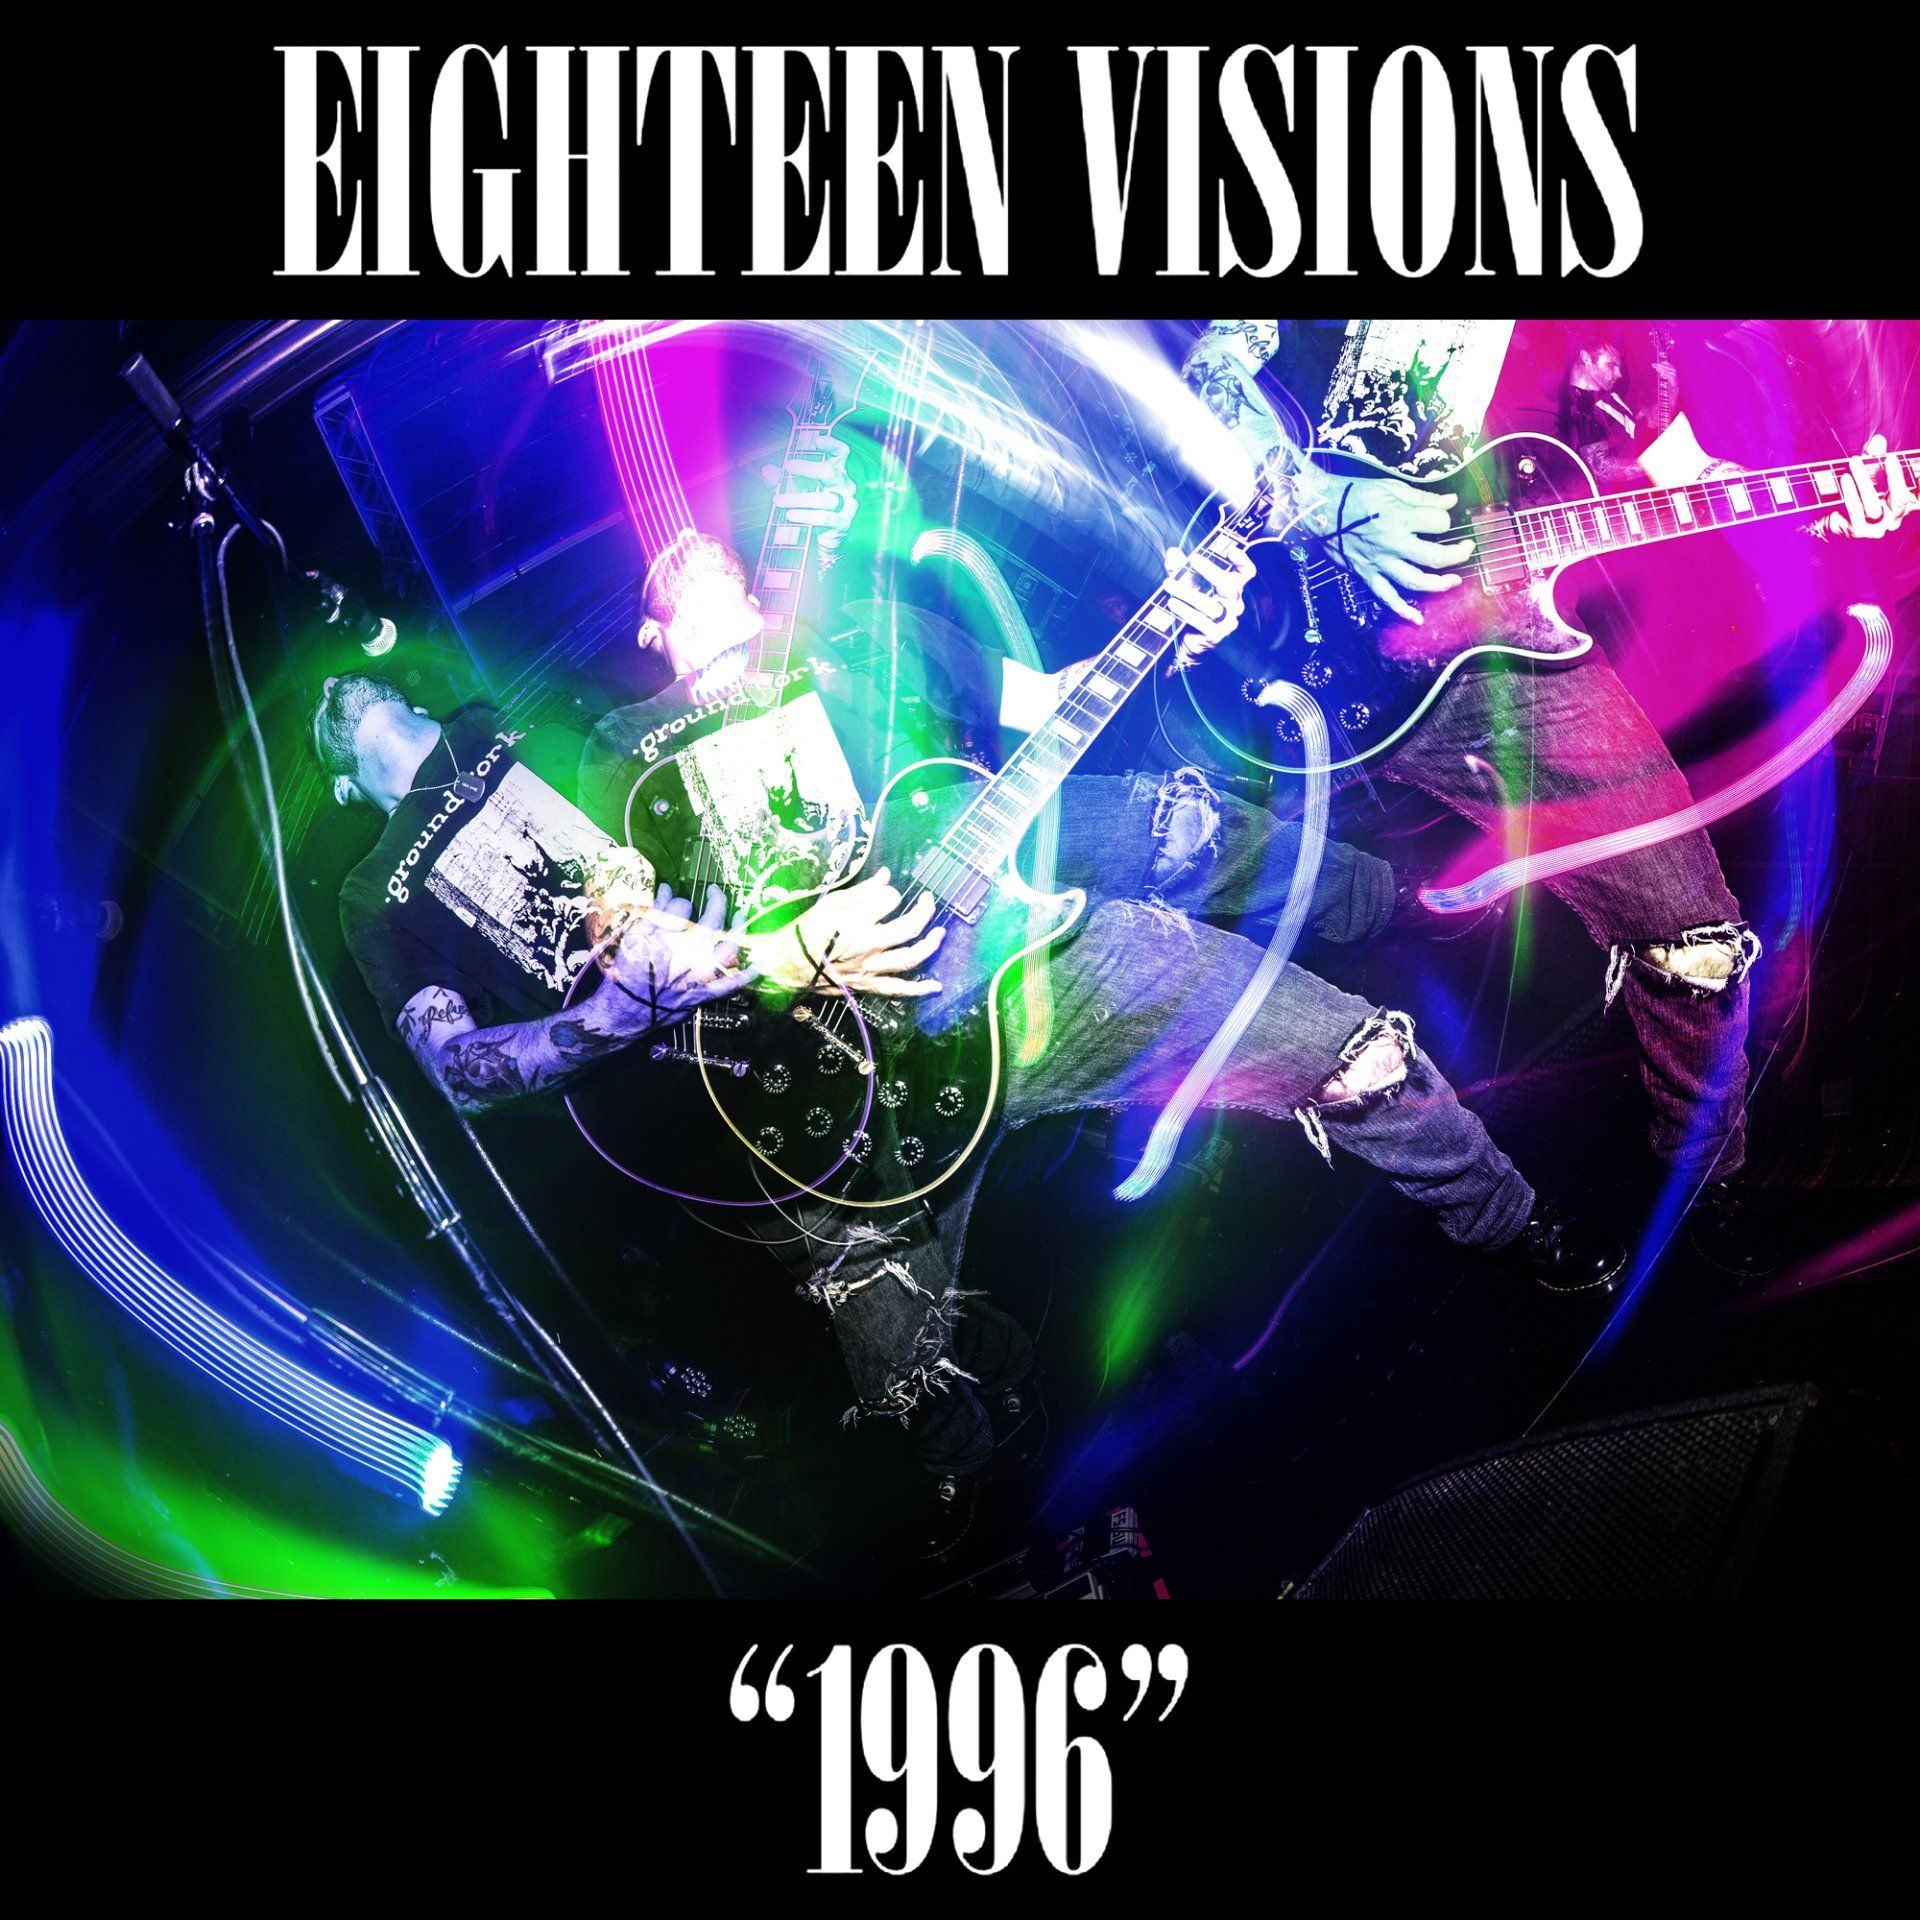 Eighteen Visions - 1996 - Rob Wallace Photography